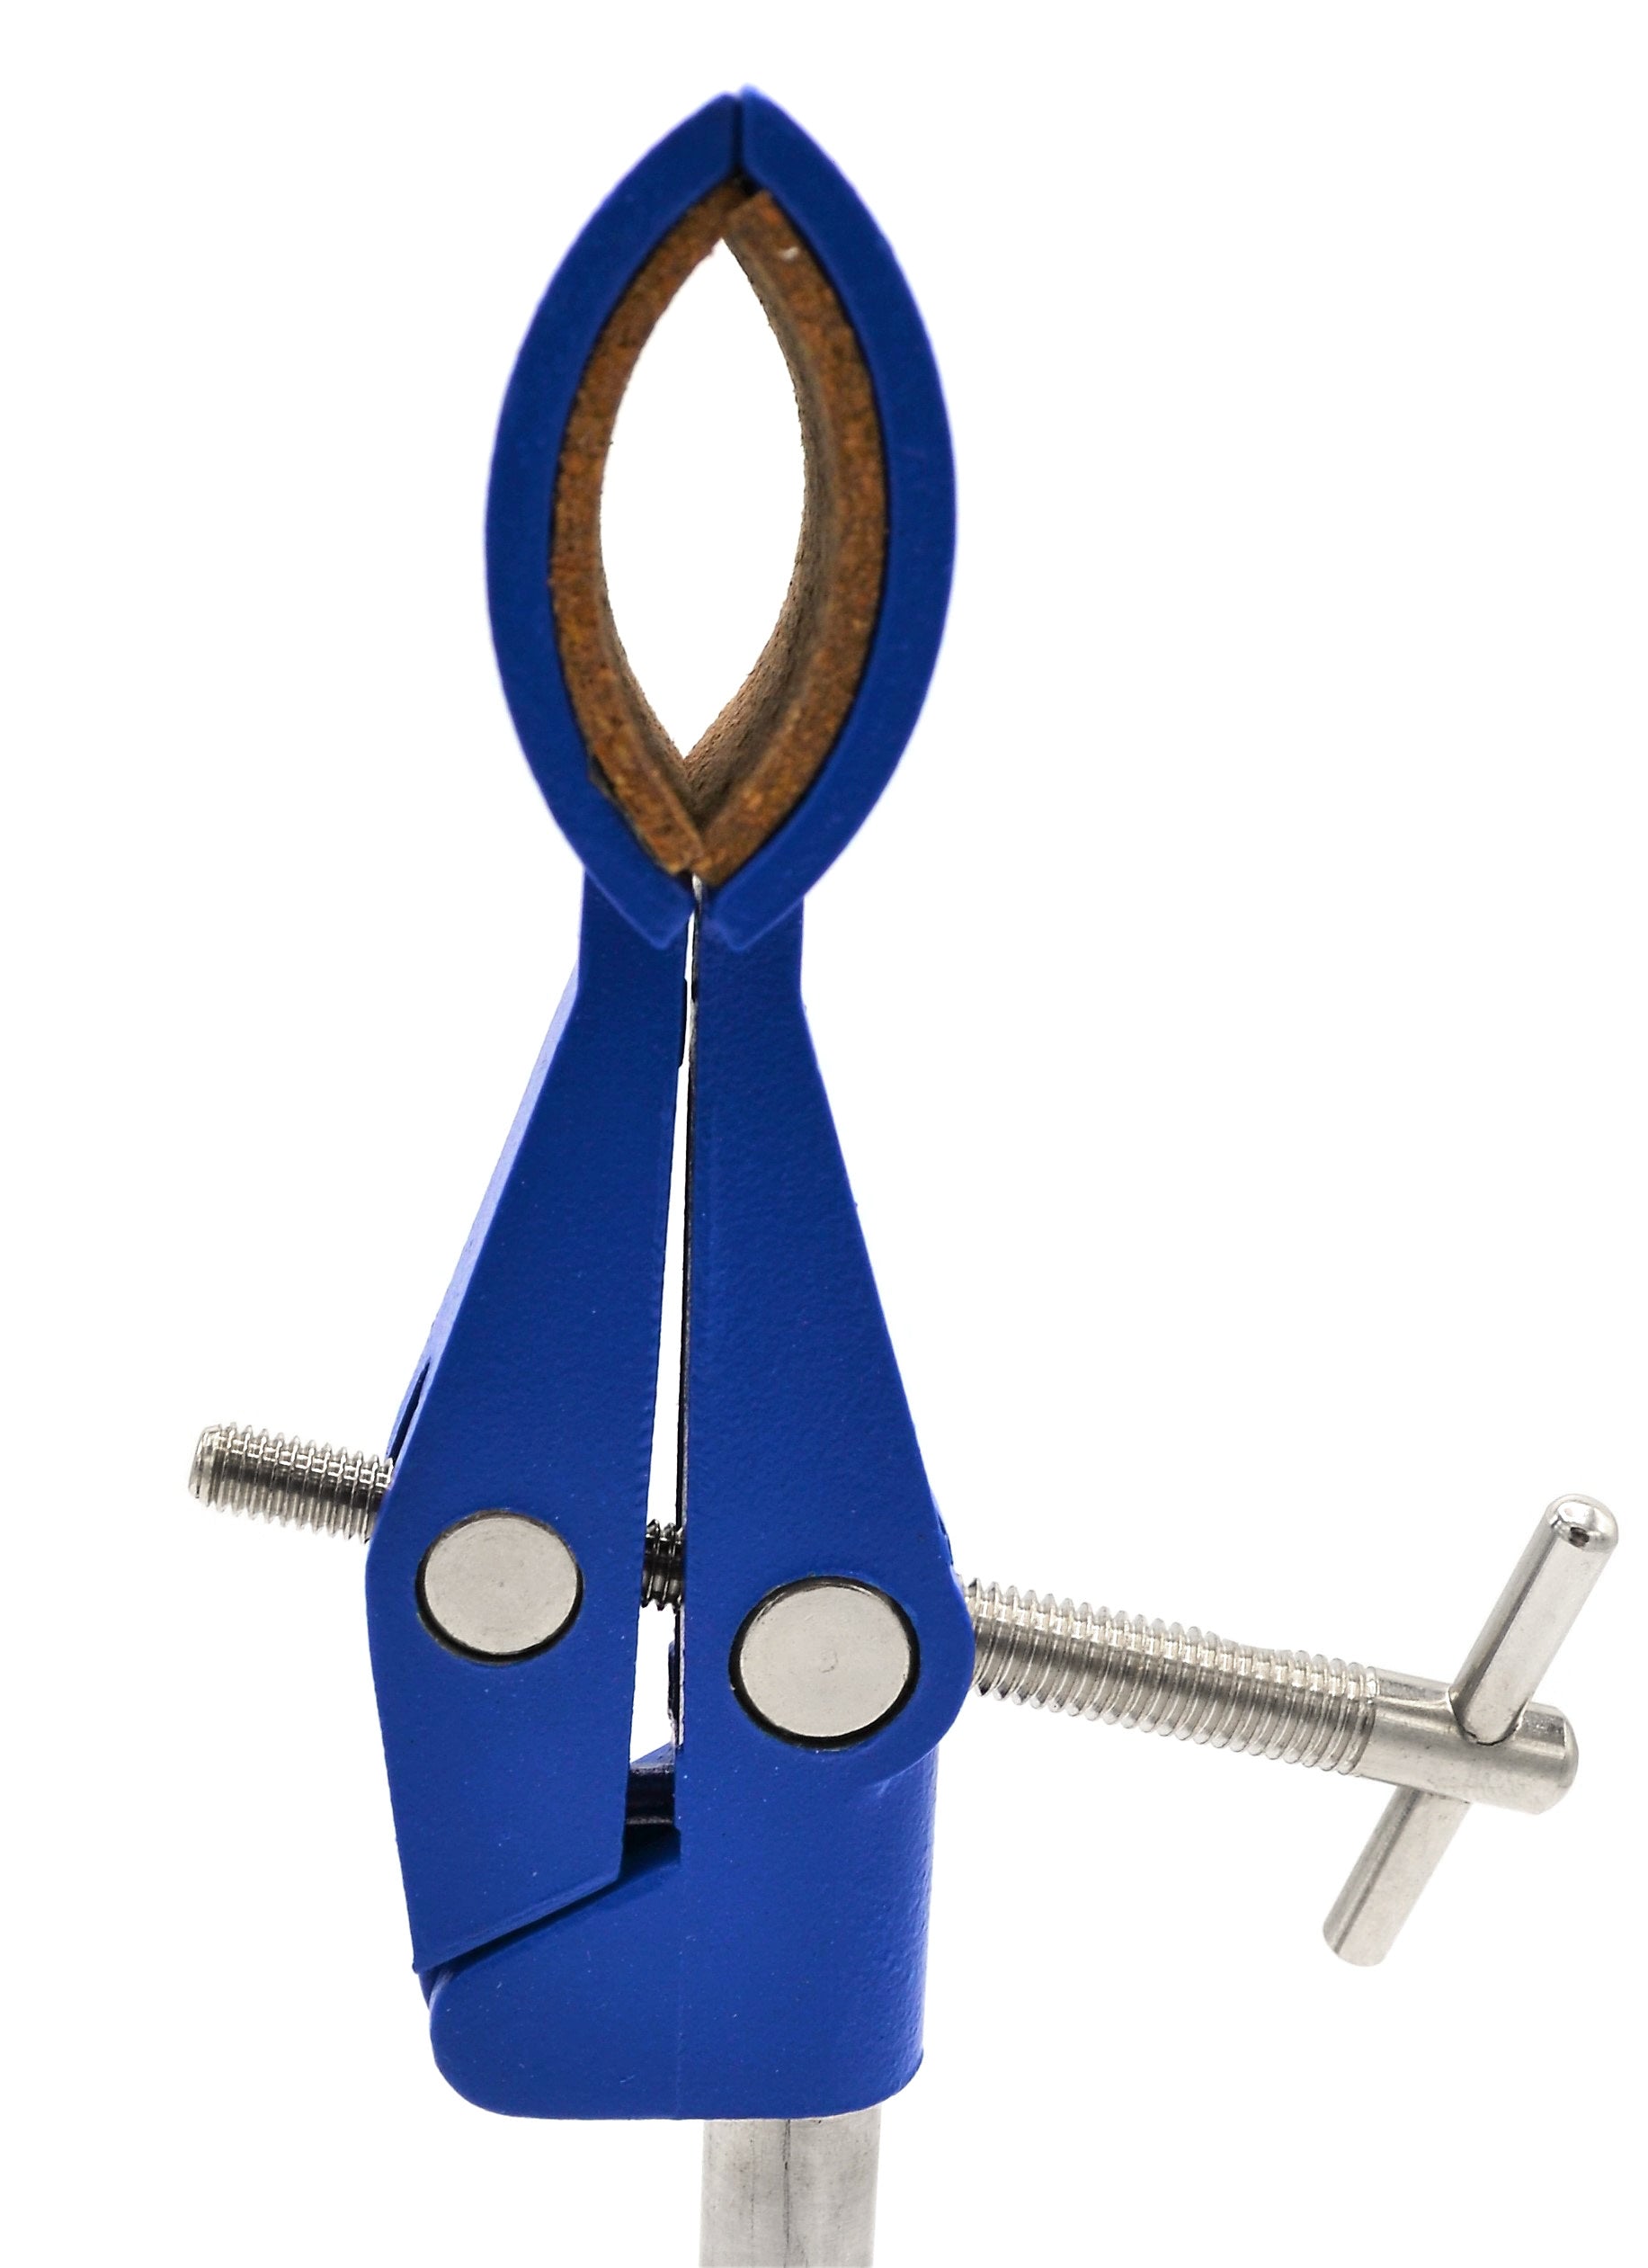 2 Prong, Cork Lined, Lab Clamp on Rod,  4.625" (11.7 cm) Maximum Clamp Opening